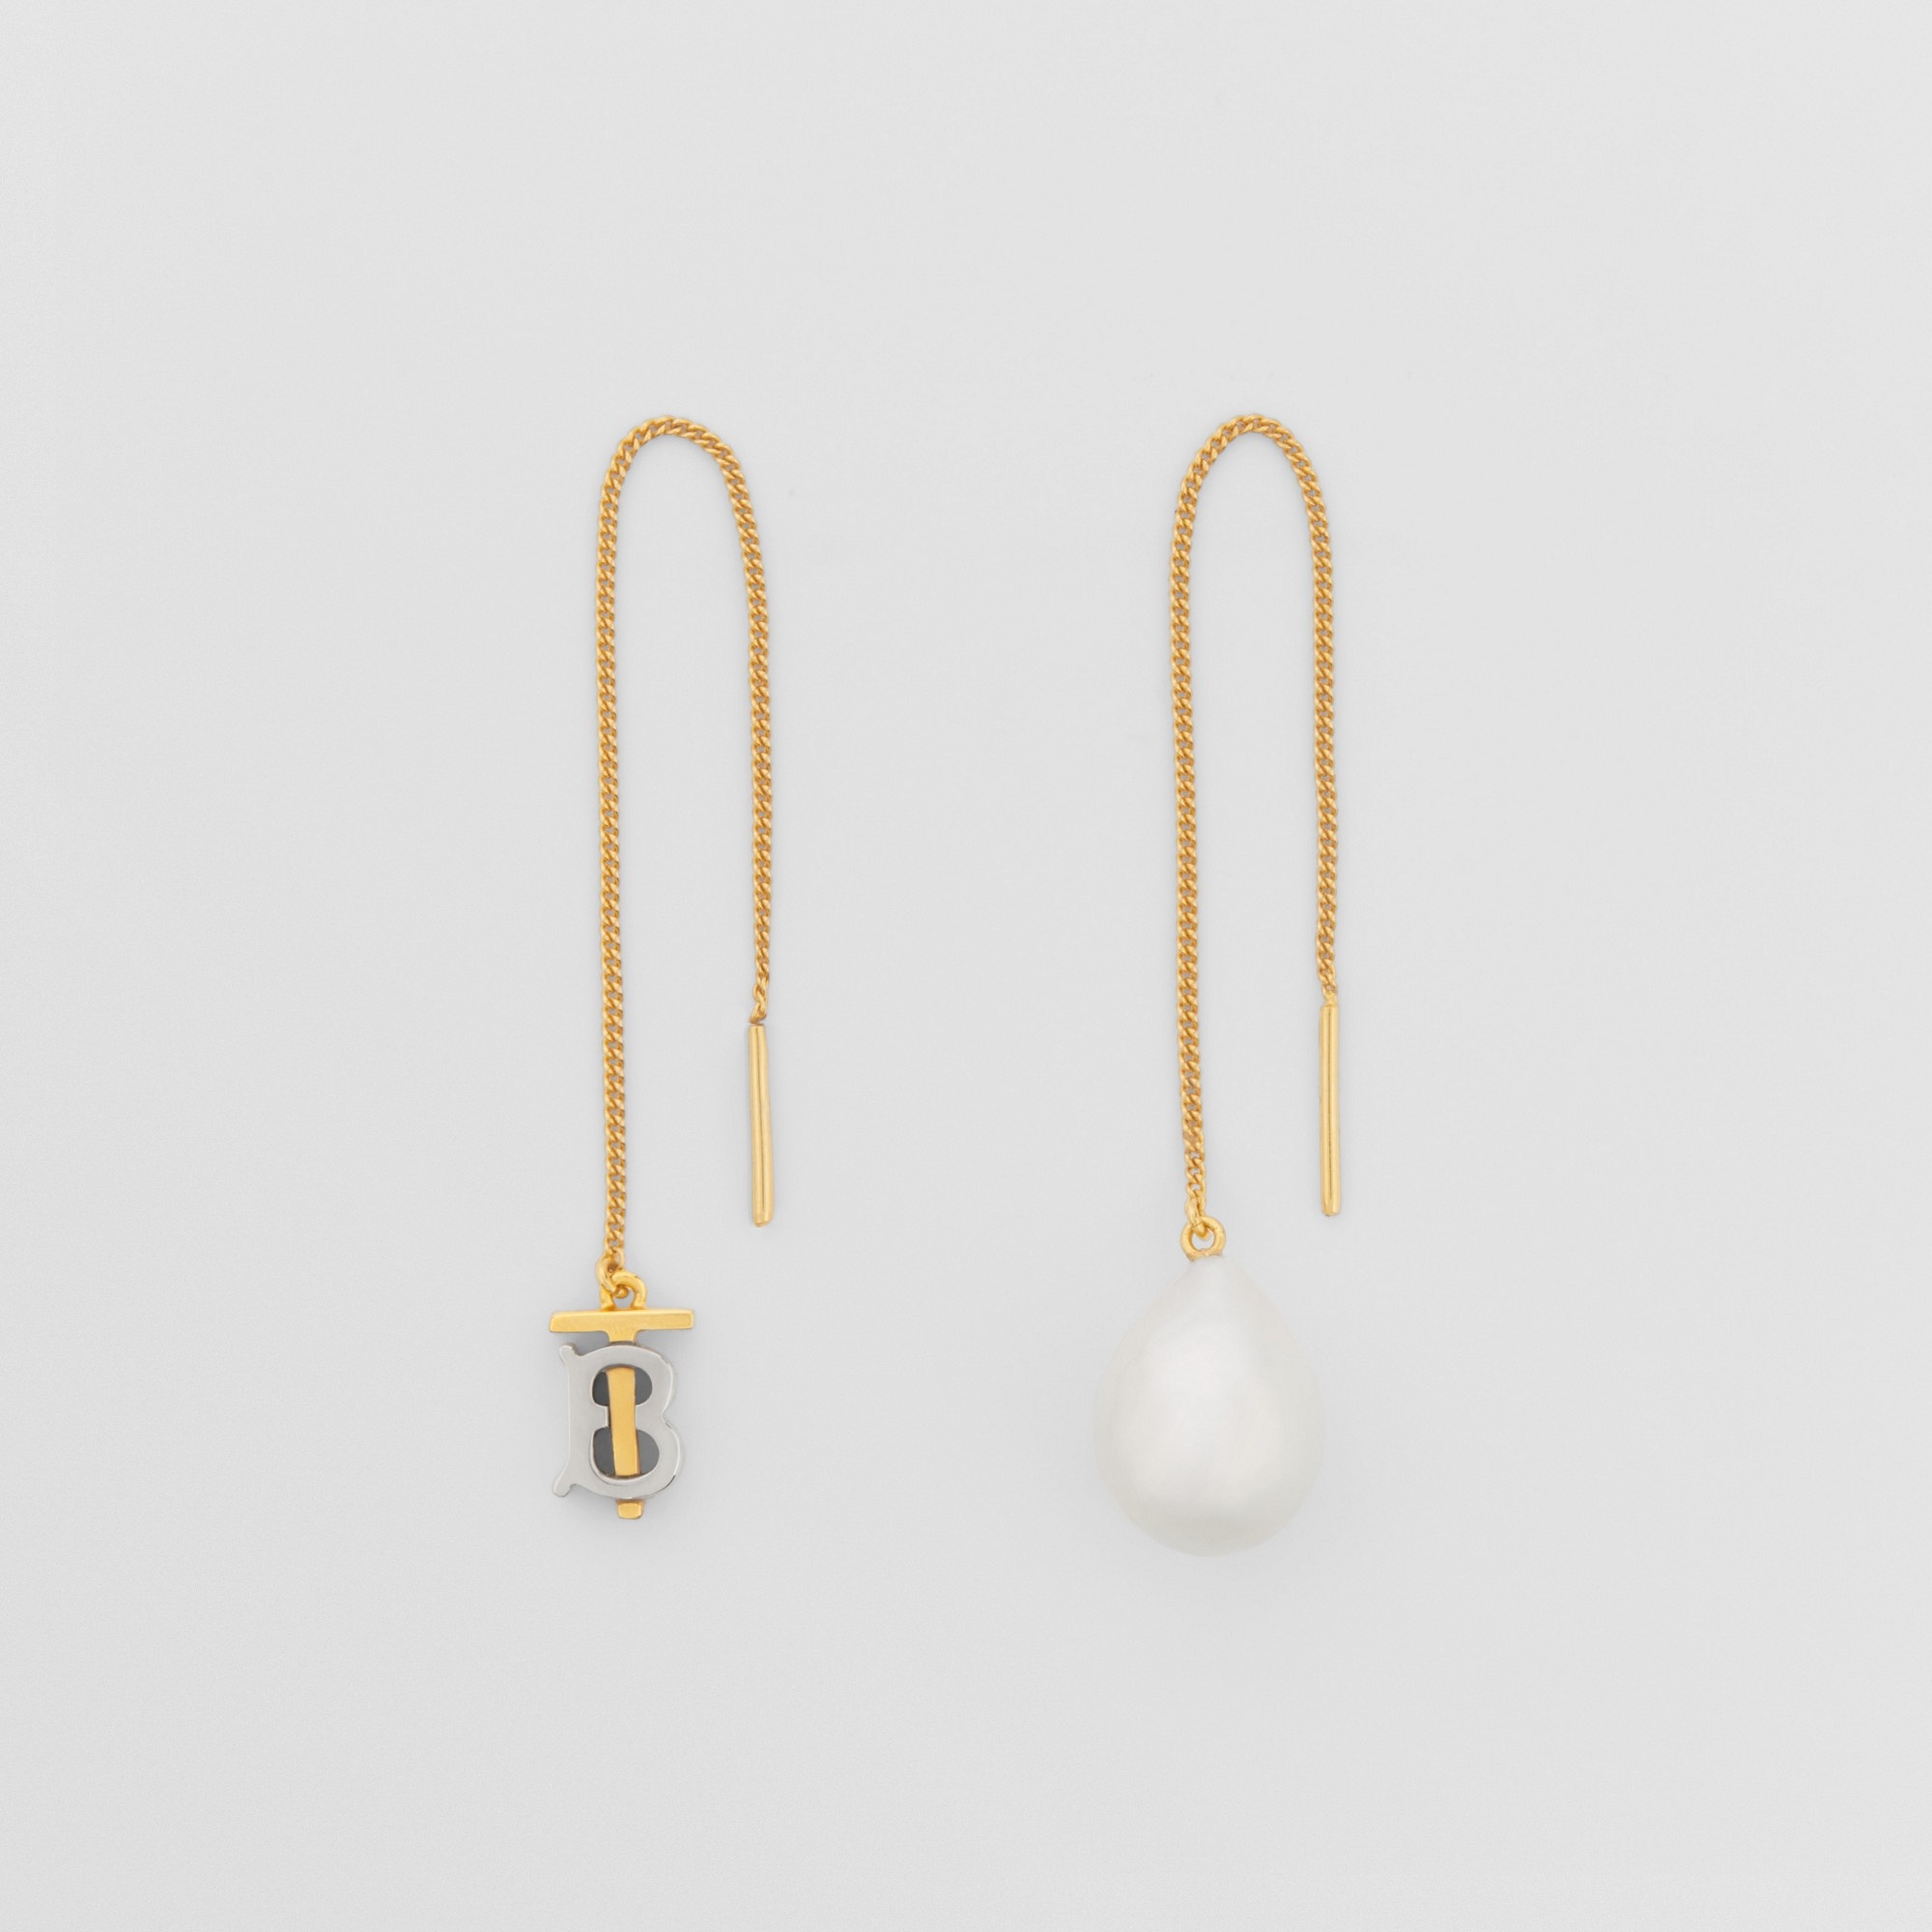 Pearl Detail Gold and Palladium-plated Earrings - 6